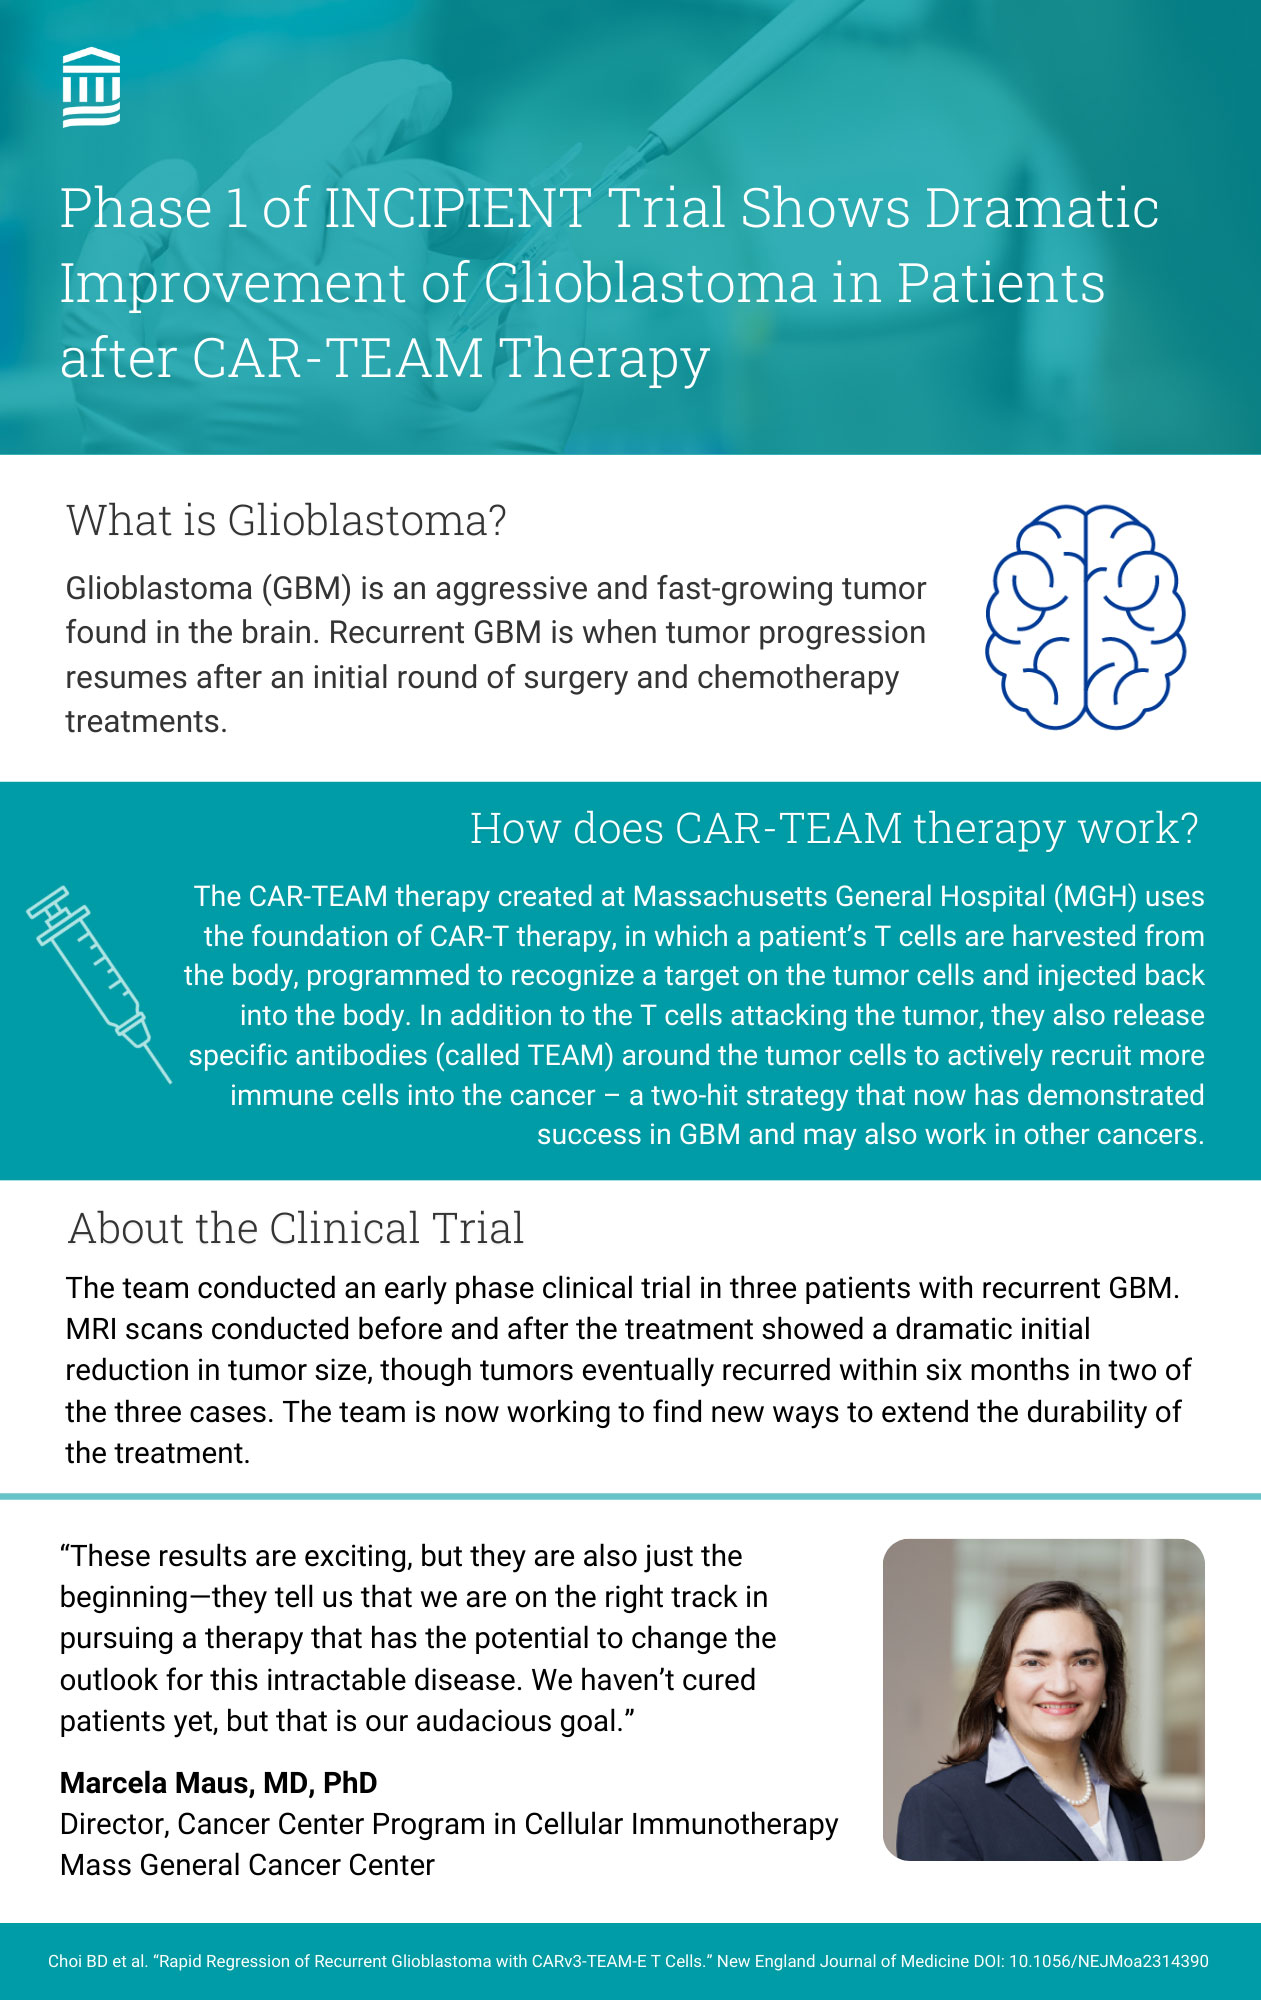 An infographic titled "Phase 1 of INCIPIENT Trial Shows Dramatic Improvement of Glioblastoma in Patients after CAR-TEAM Therapy."